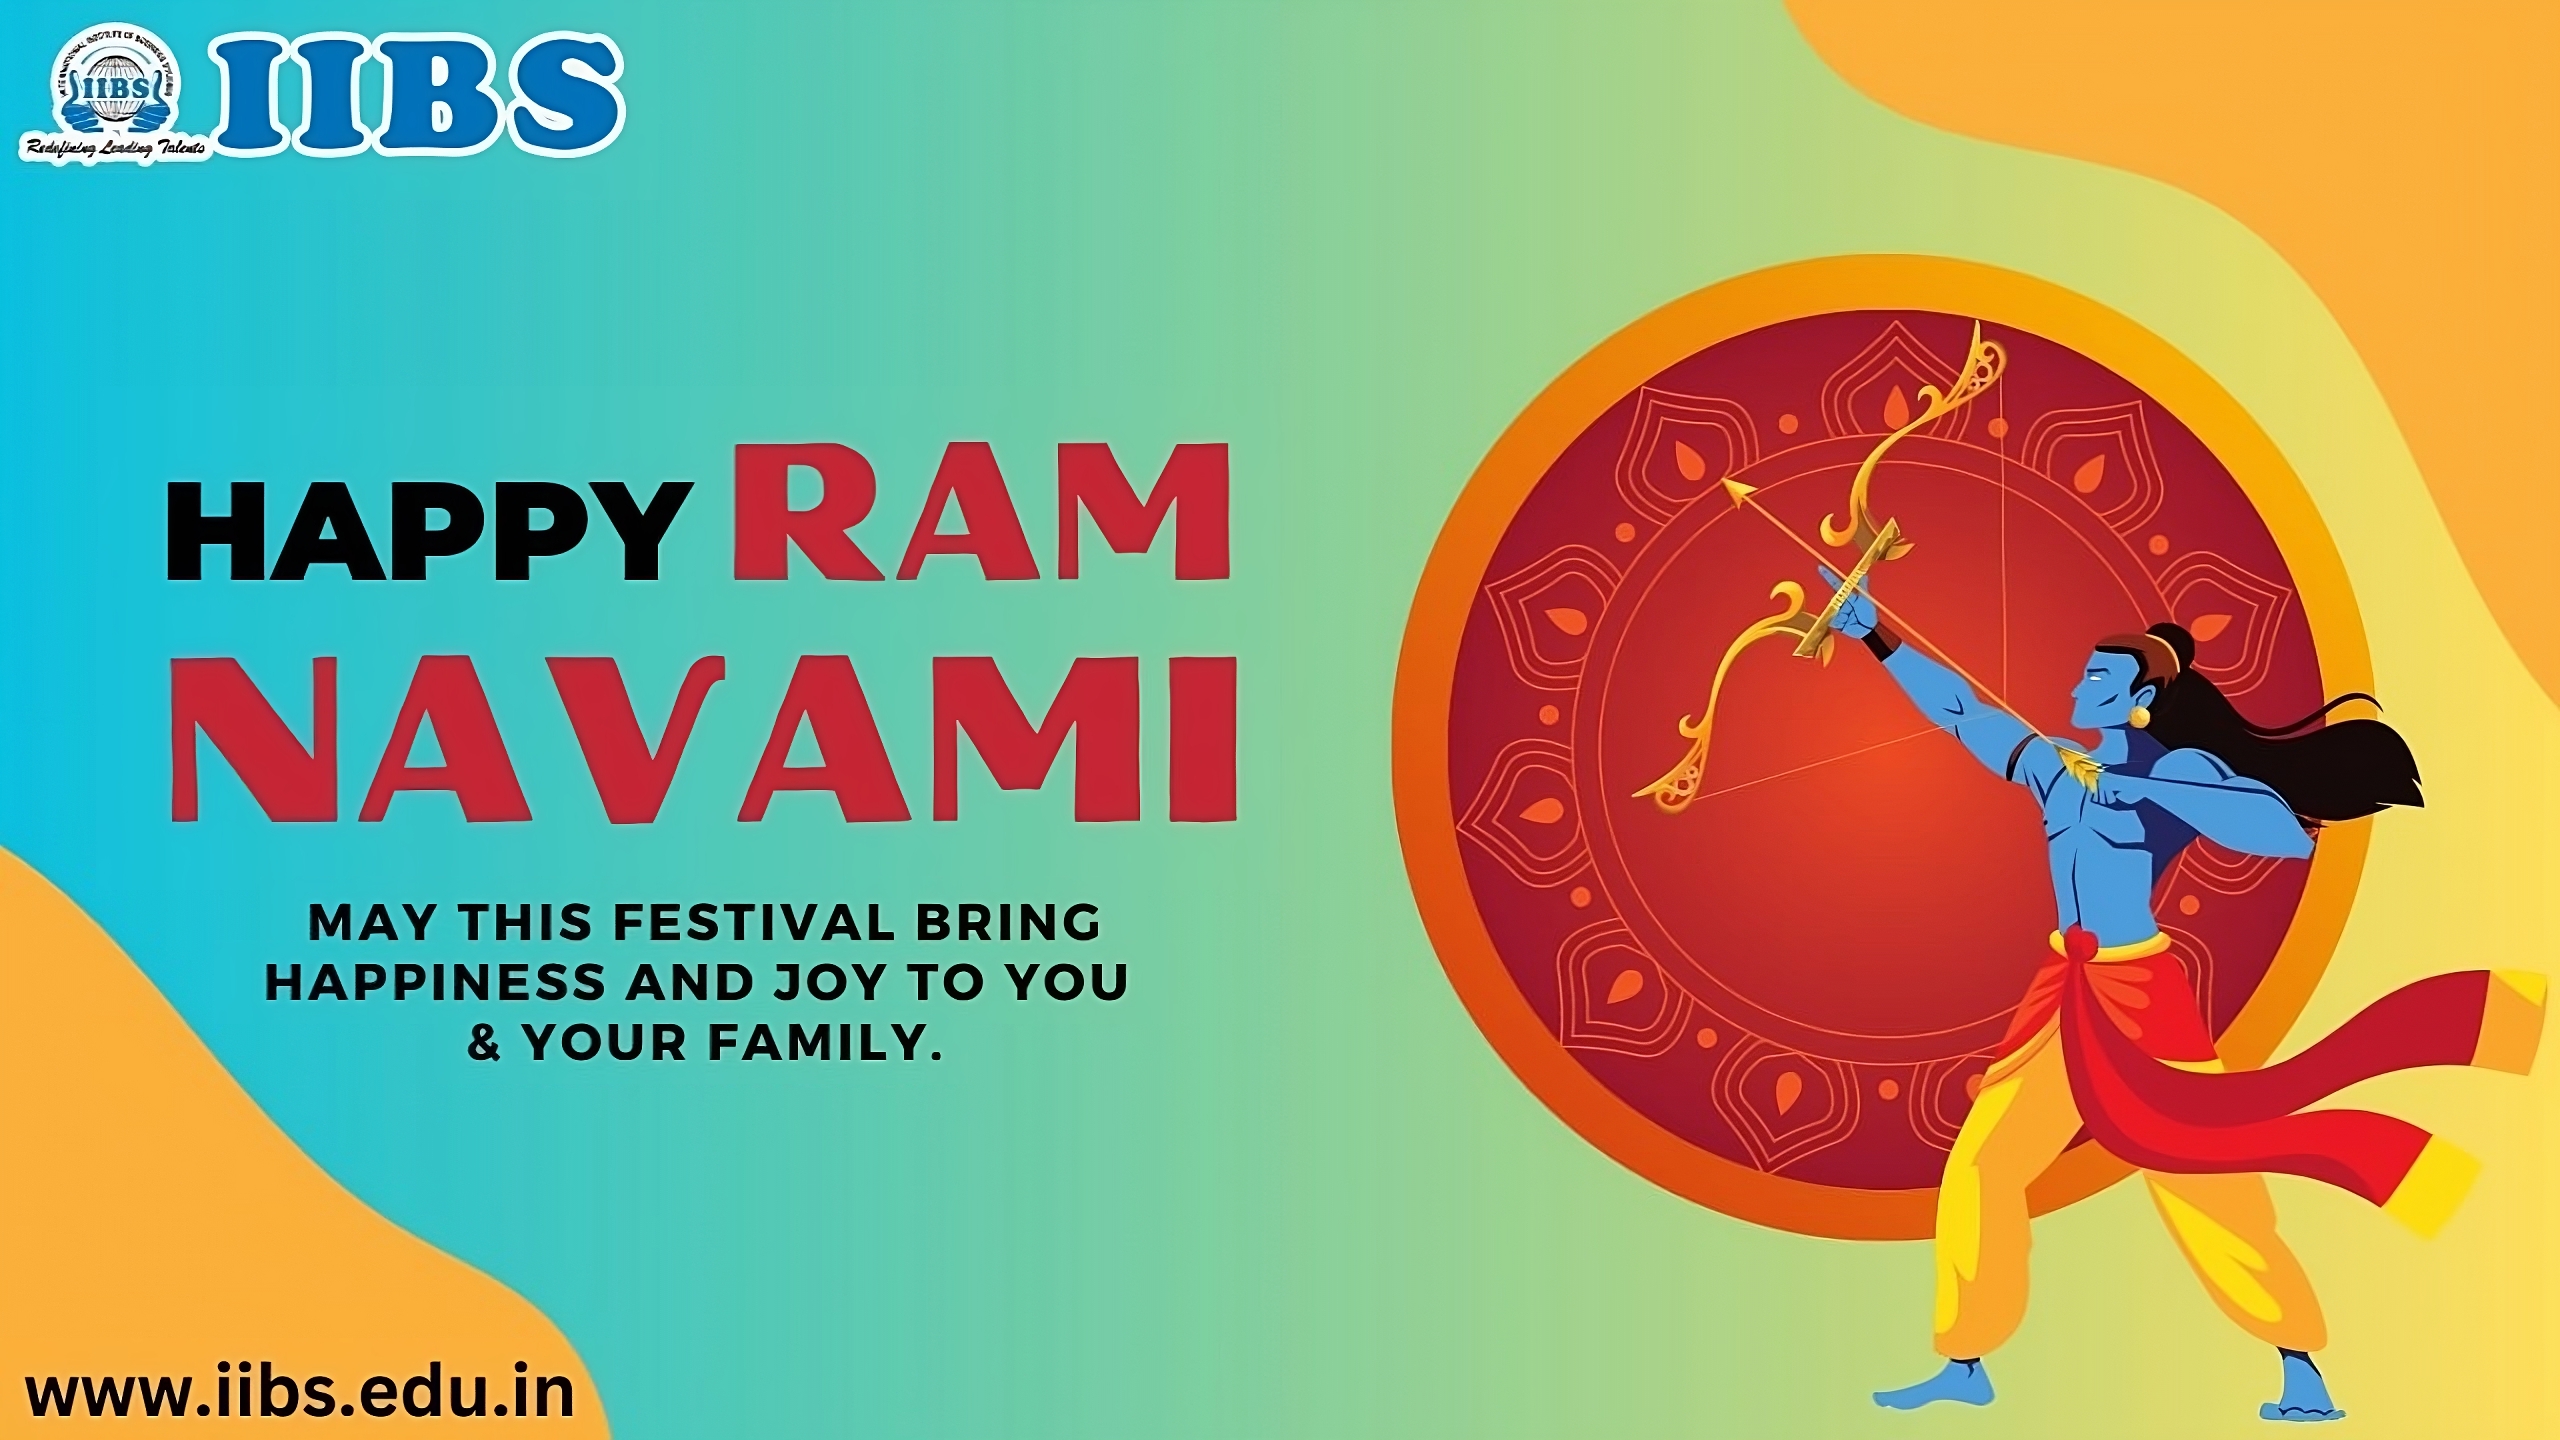 On the Occasion of Sri Ram Navami | Online MBA Colleges in Bangalore